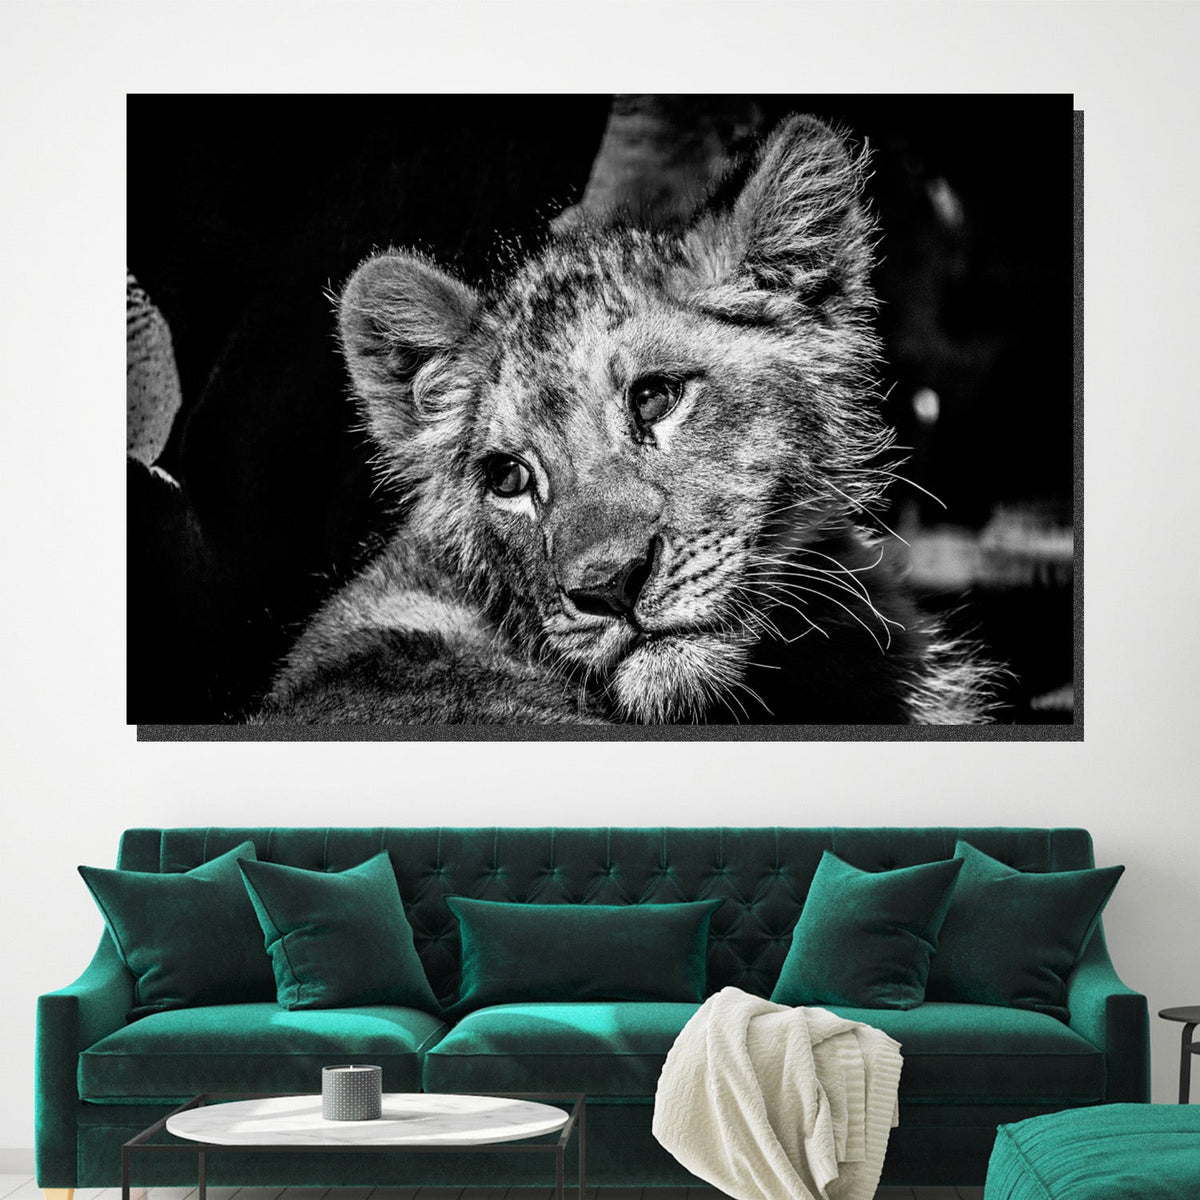 https://cdn.shopify.com/s/files/1/0387/9986/8044/products/LionCubCanvasArtprintStretched-1.jpg